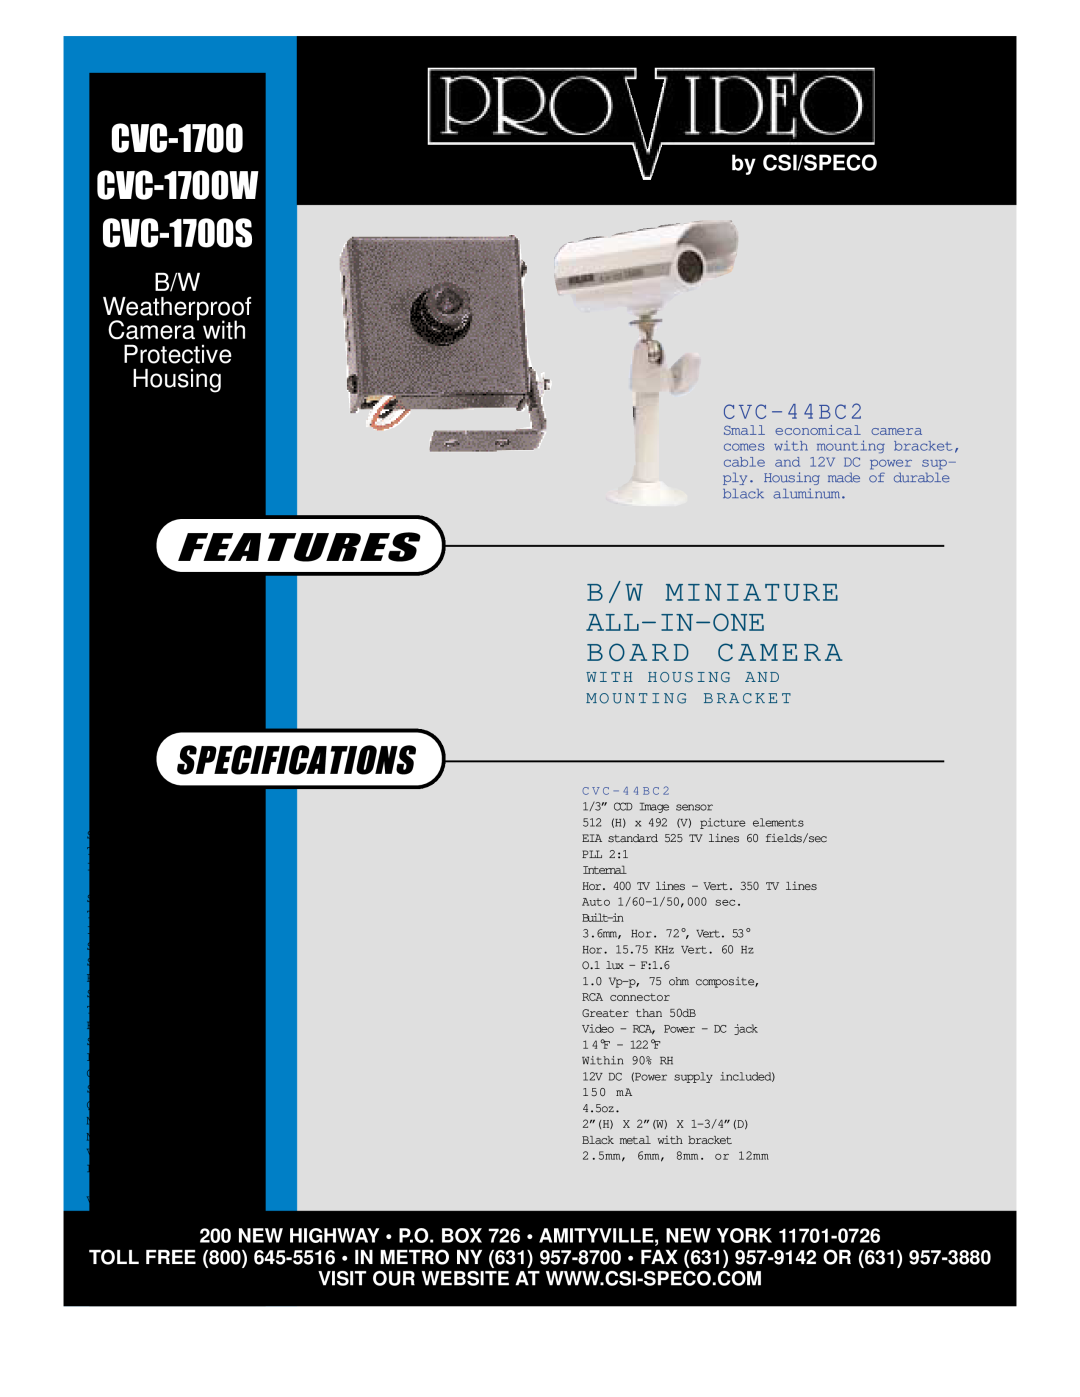 Speco Technologies specifications CVC-1700W CVC-1700S, Features, Specifications, B/W Miniature All-In-One Board Camera 